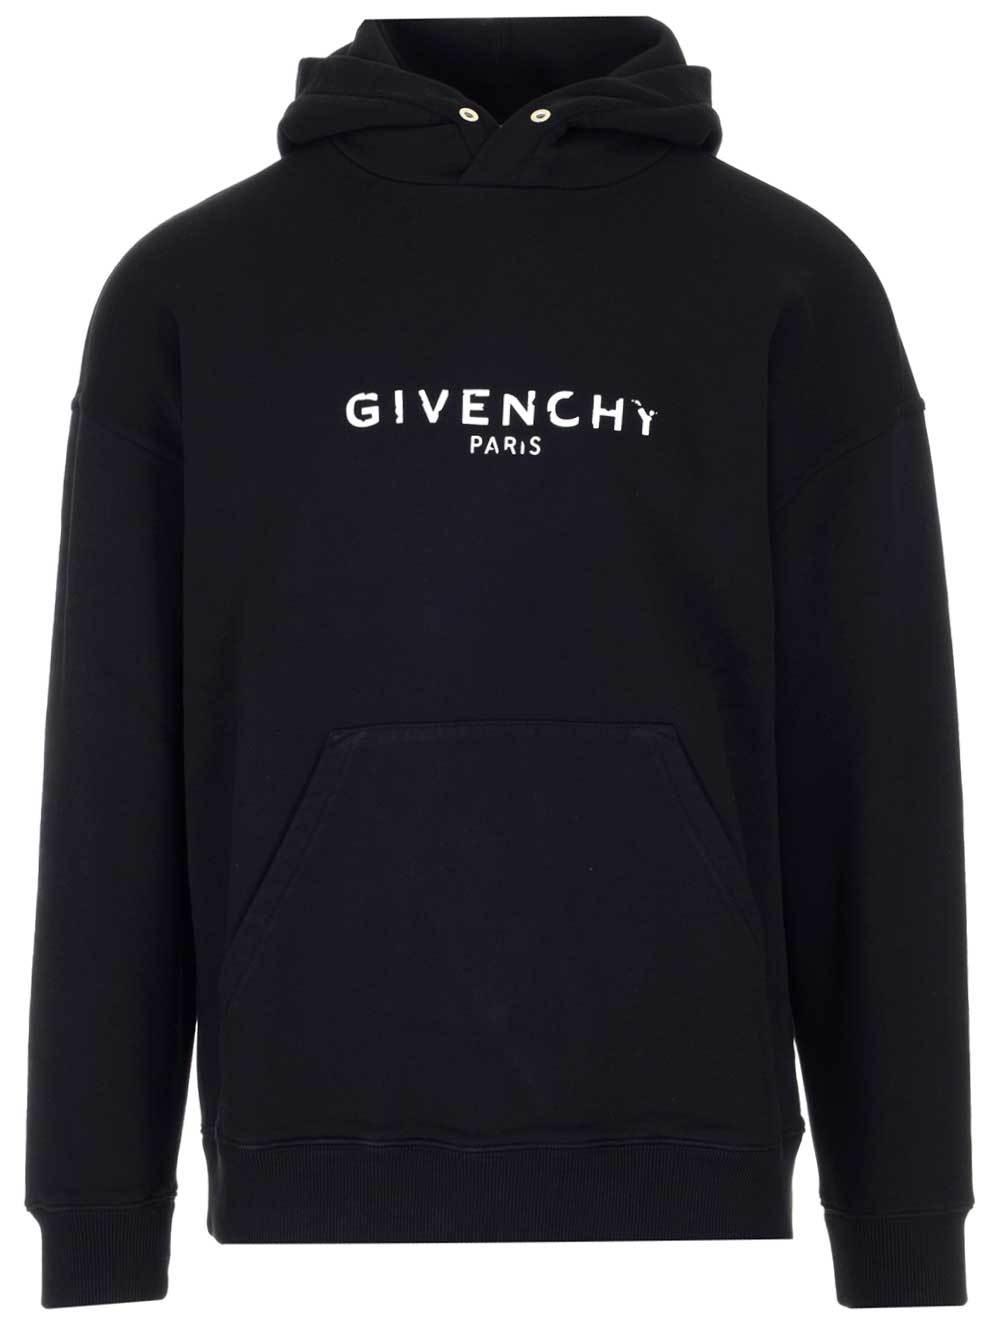 Givenchy Printed Hooded Sweatshirt in Black for Men - Lyst